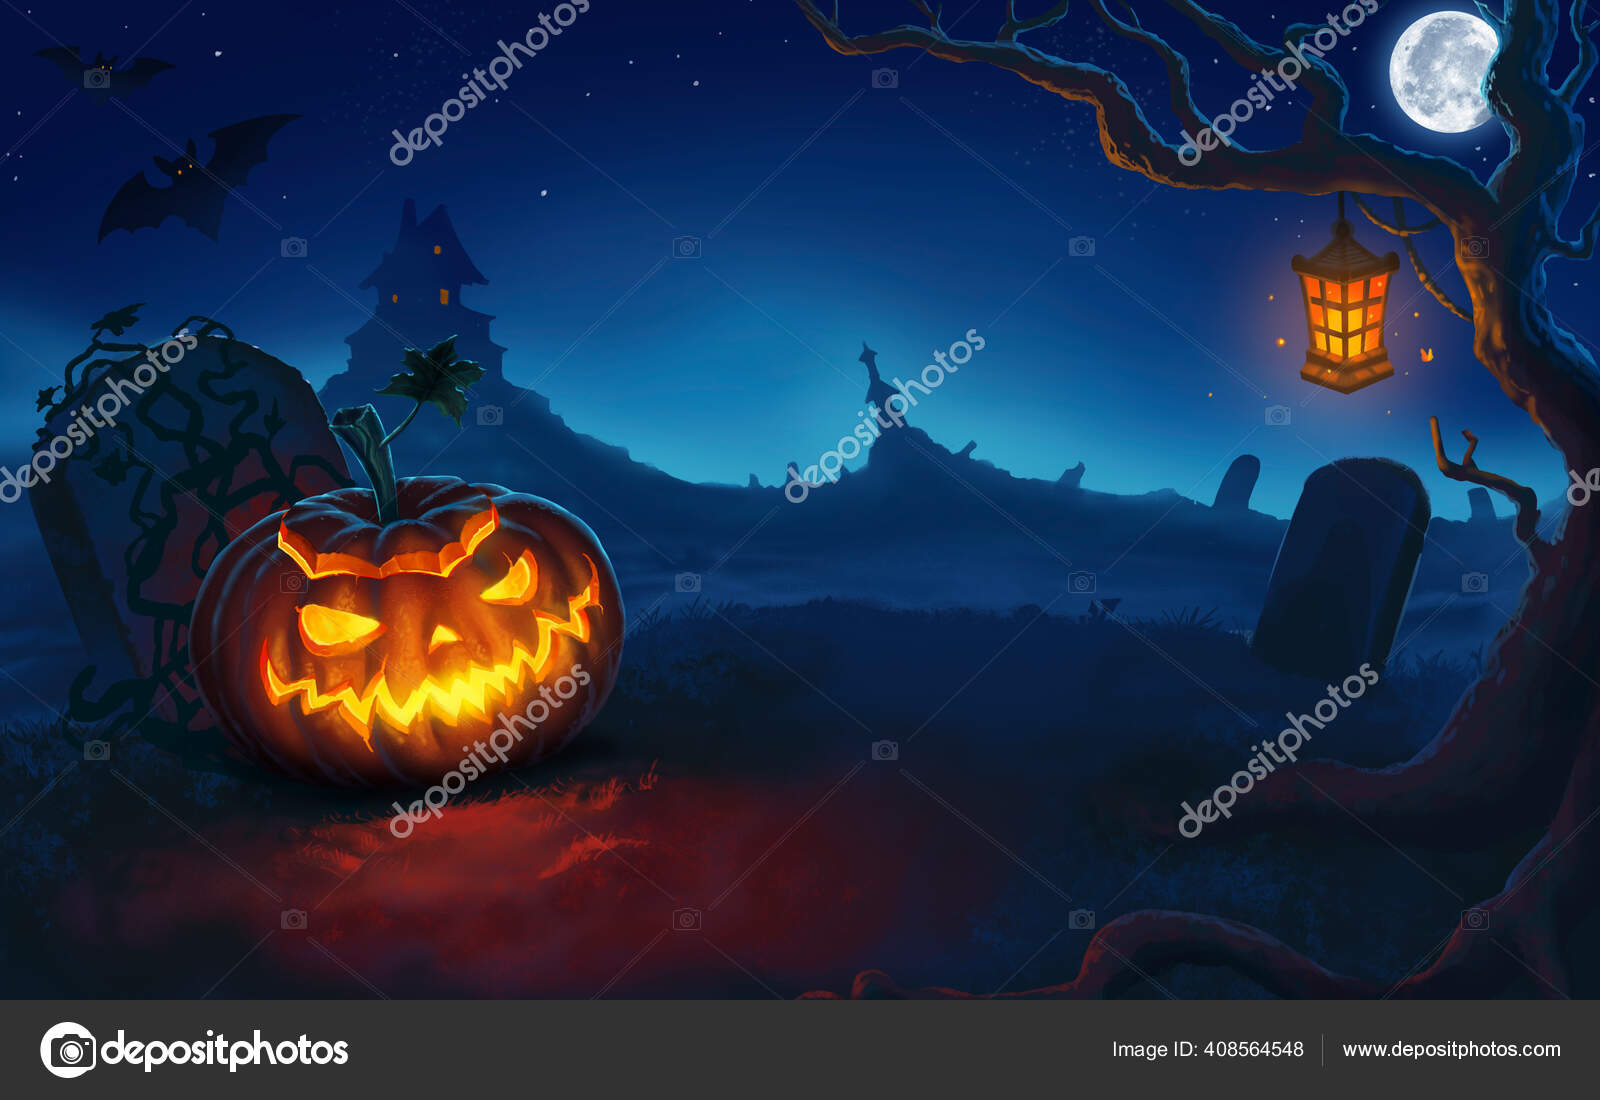 Halloween wallpaper for desktop iPad  iPhone PSD  icons included   Graphicsfuel